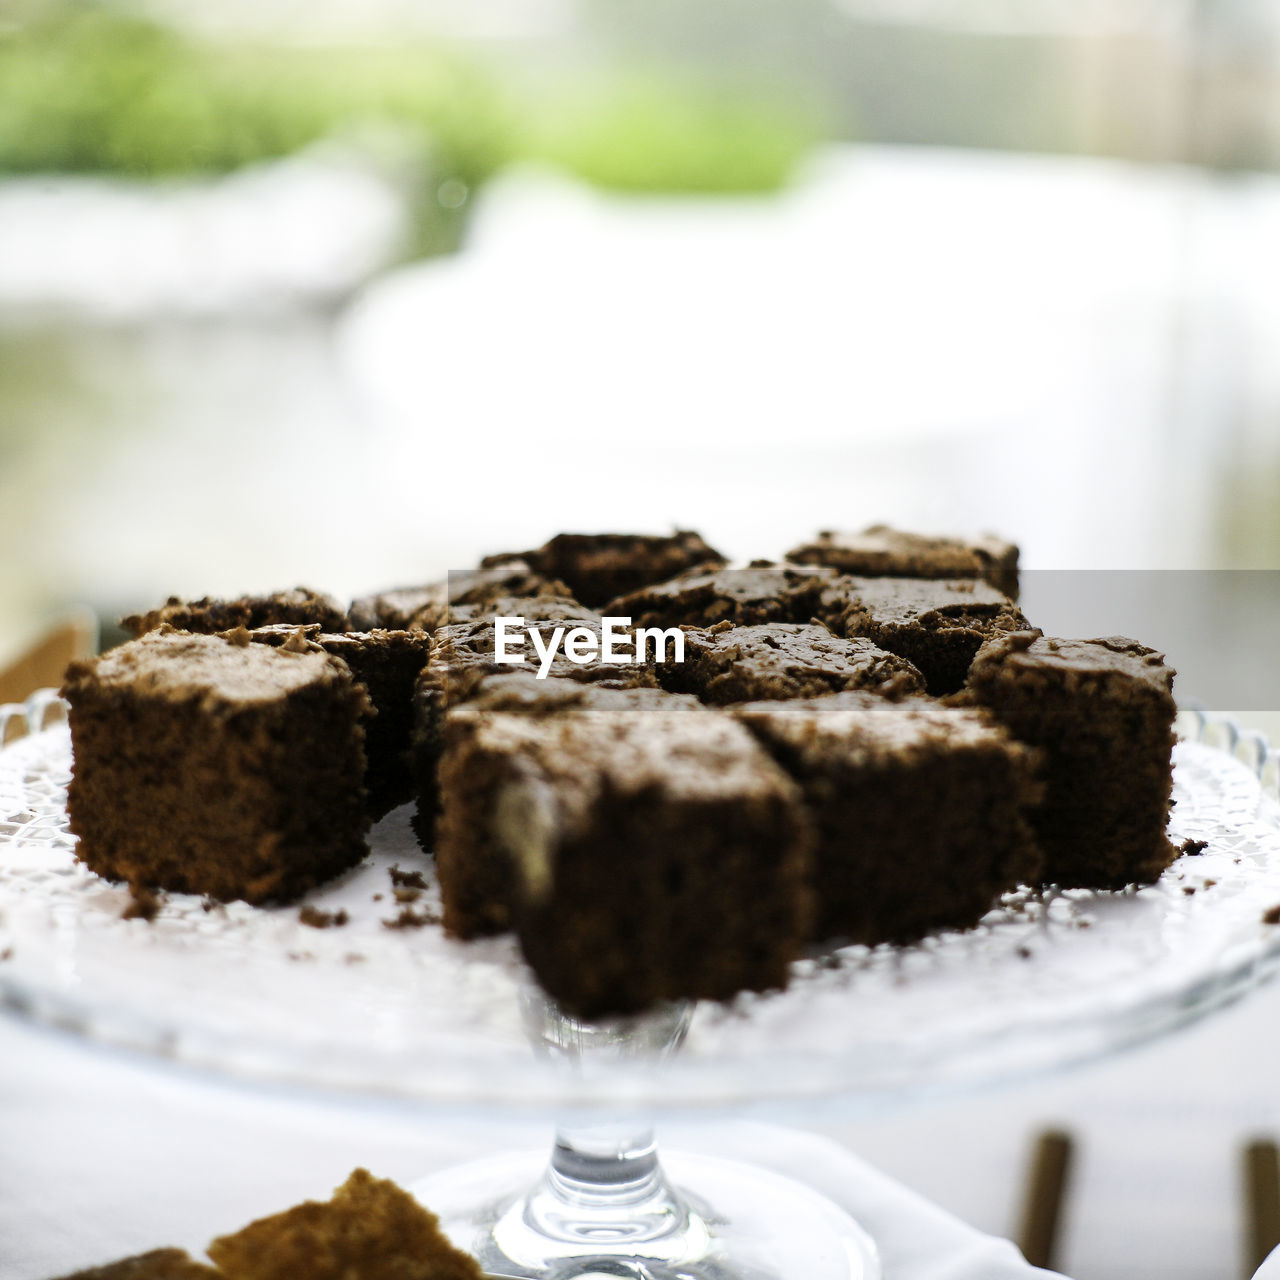 CLOSE-UP OF CHOCOLATE CAKE ON TABLE